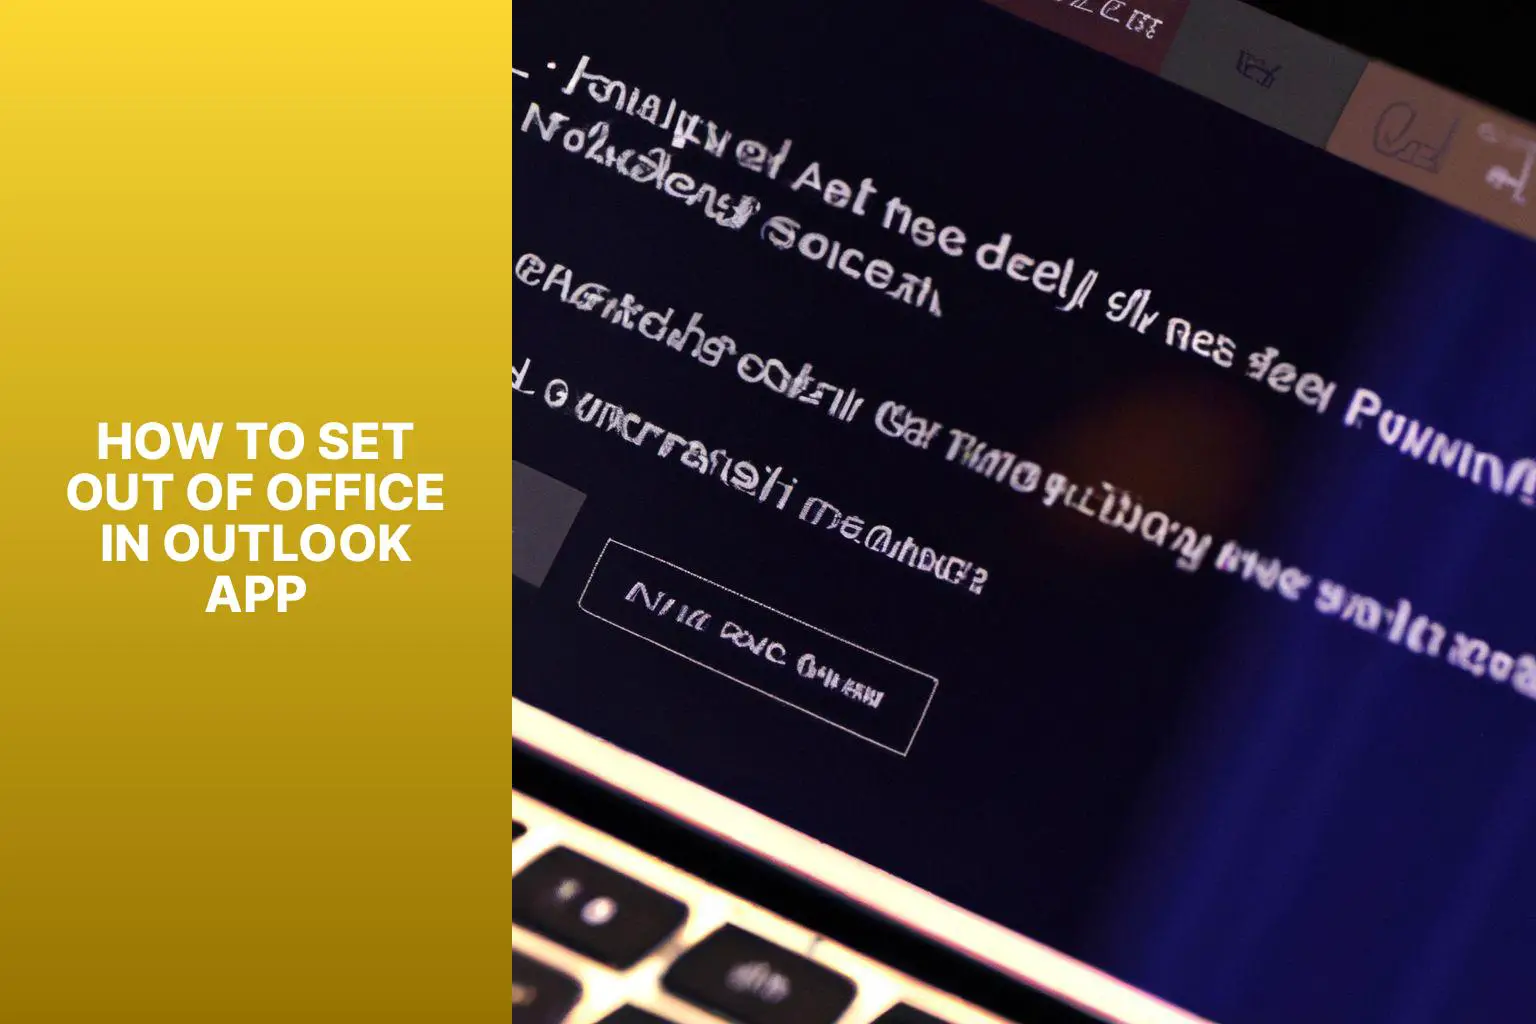 A Step-by-Step Guide on Setting Out of Office in Outlook App